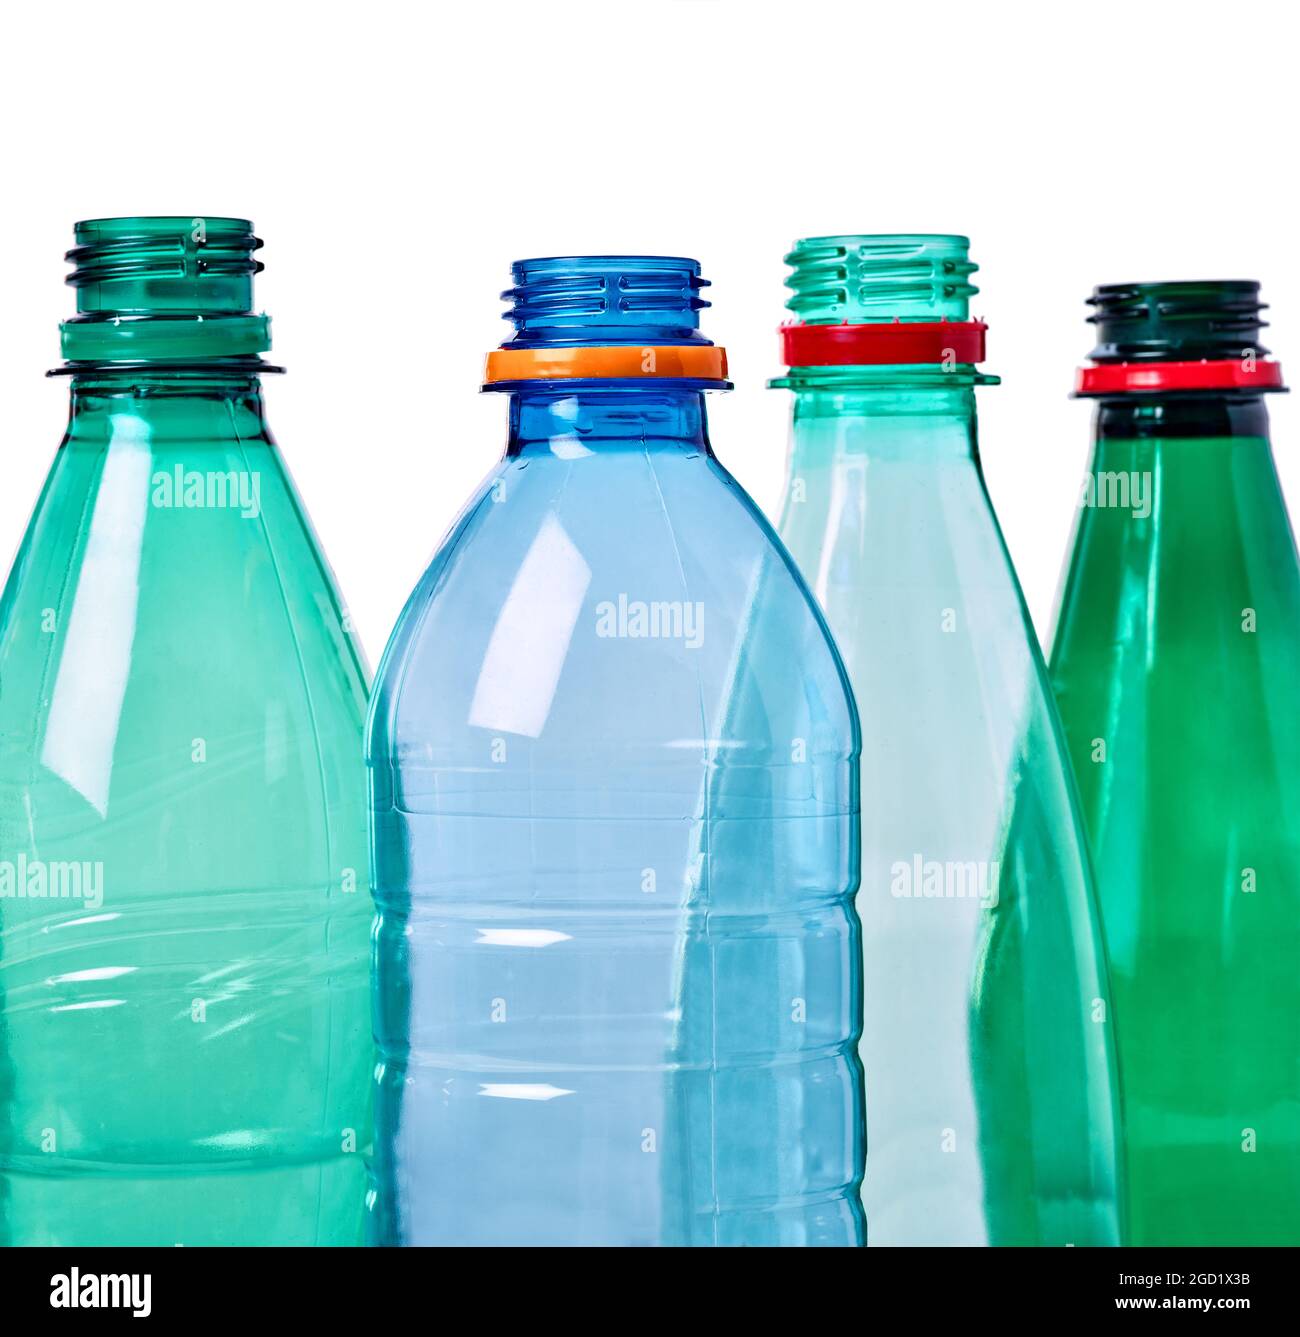 plastic bottle empty transparent recycling container water environment drink garbage beverage Stock Photo